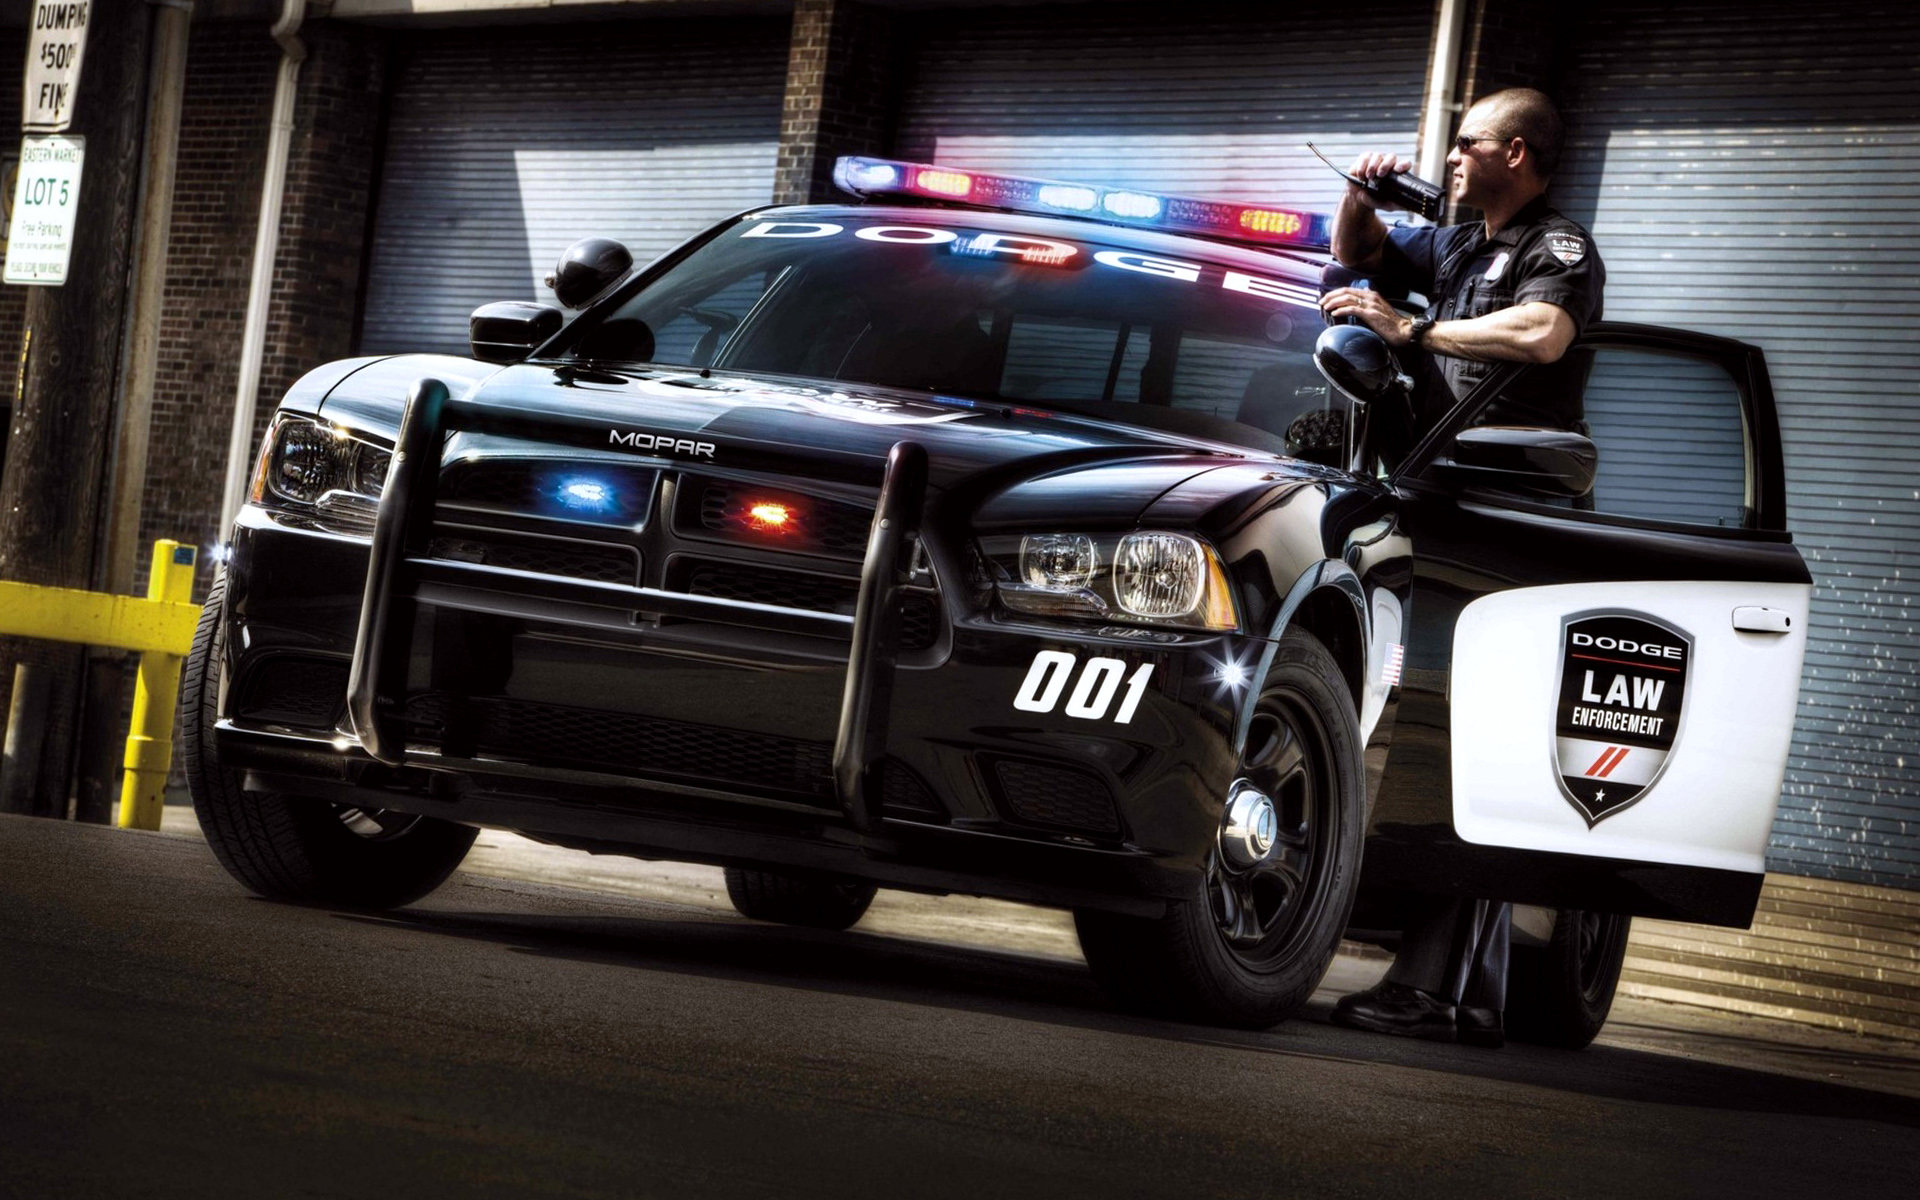 Cool Police Car Action Wallpaper HD